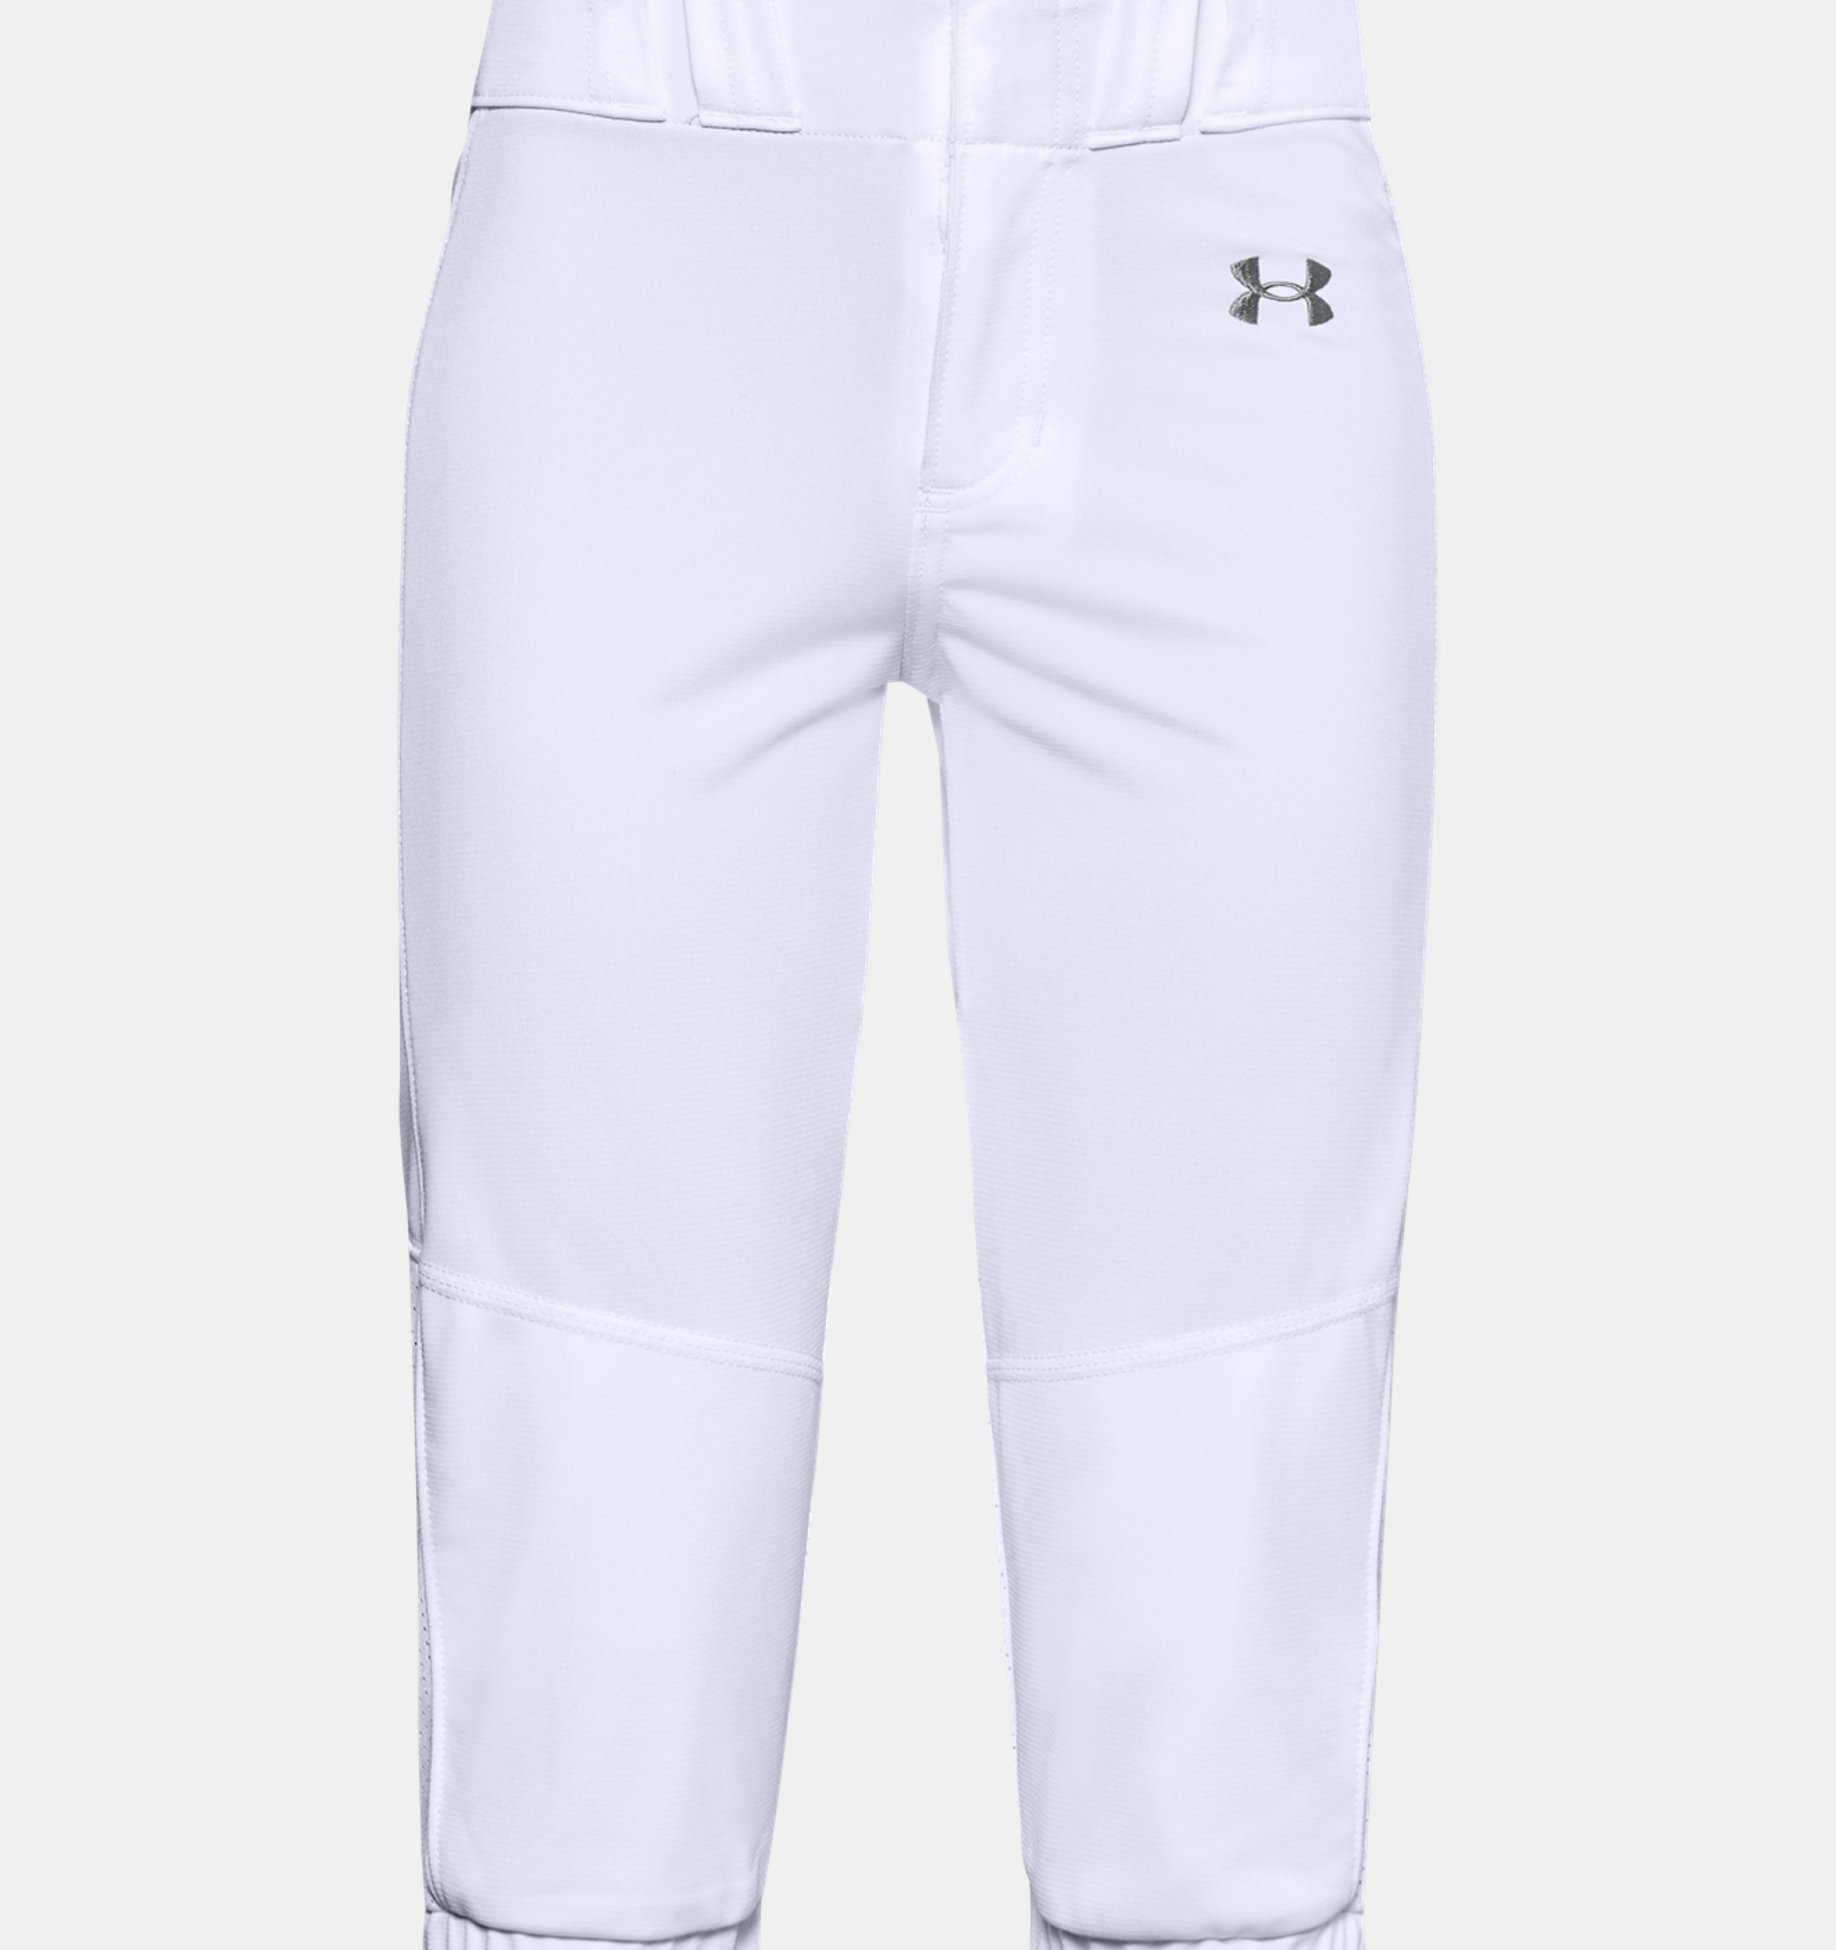 New Combat Womens and Girls Fastpitch Softball Pants White/Navy multiple sizes 